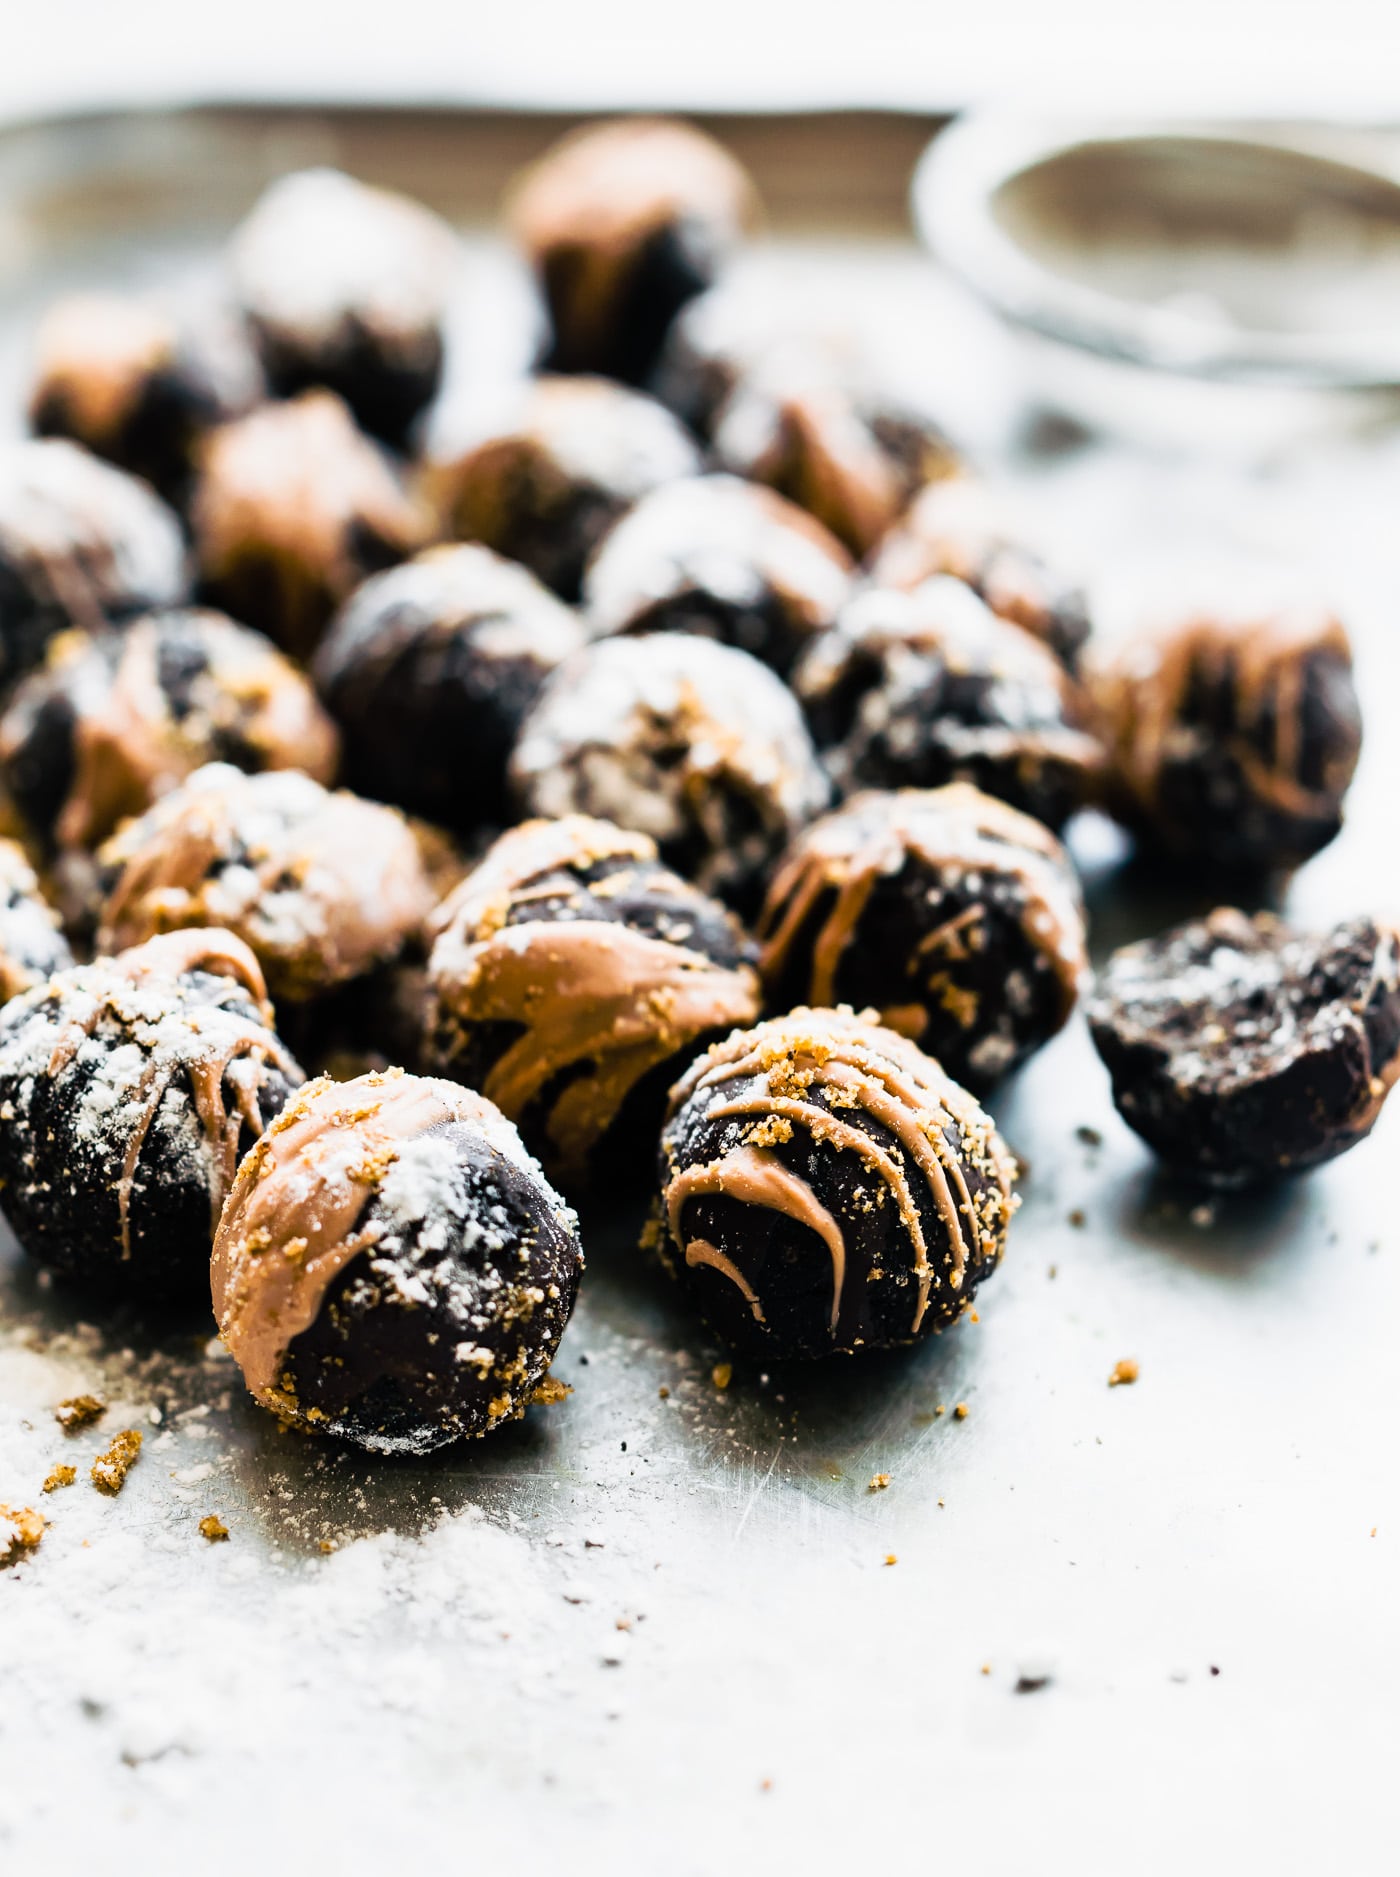 Several Dark Chocolate-Amaretto Cake Bites coated in almond butter and dark chocolate, dusted with crumble.